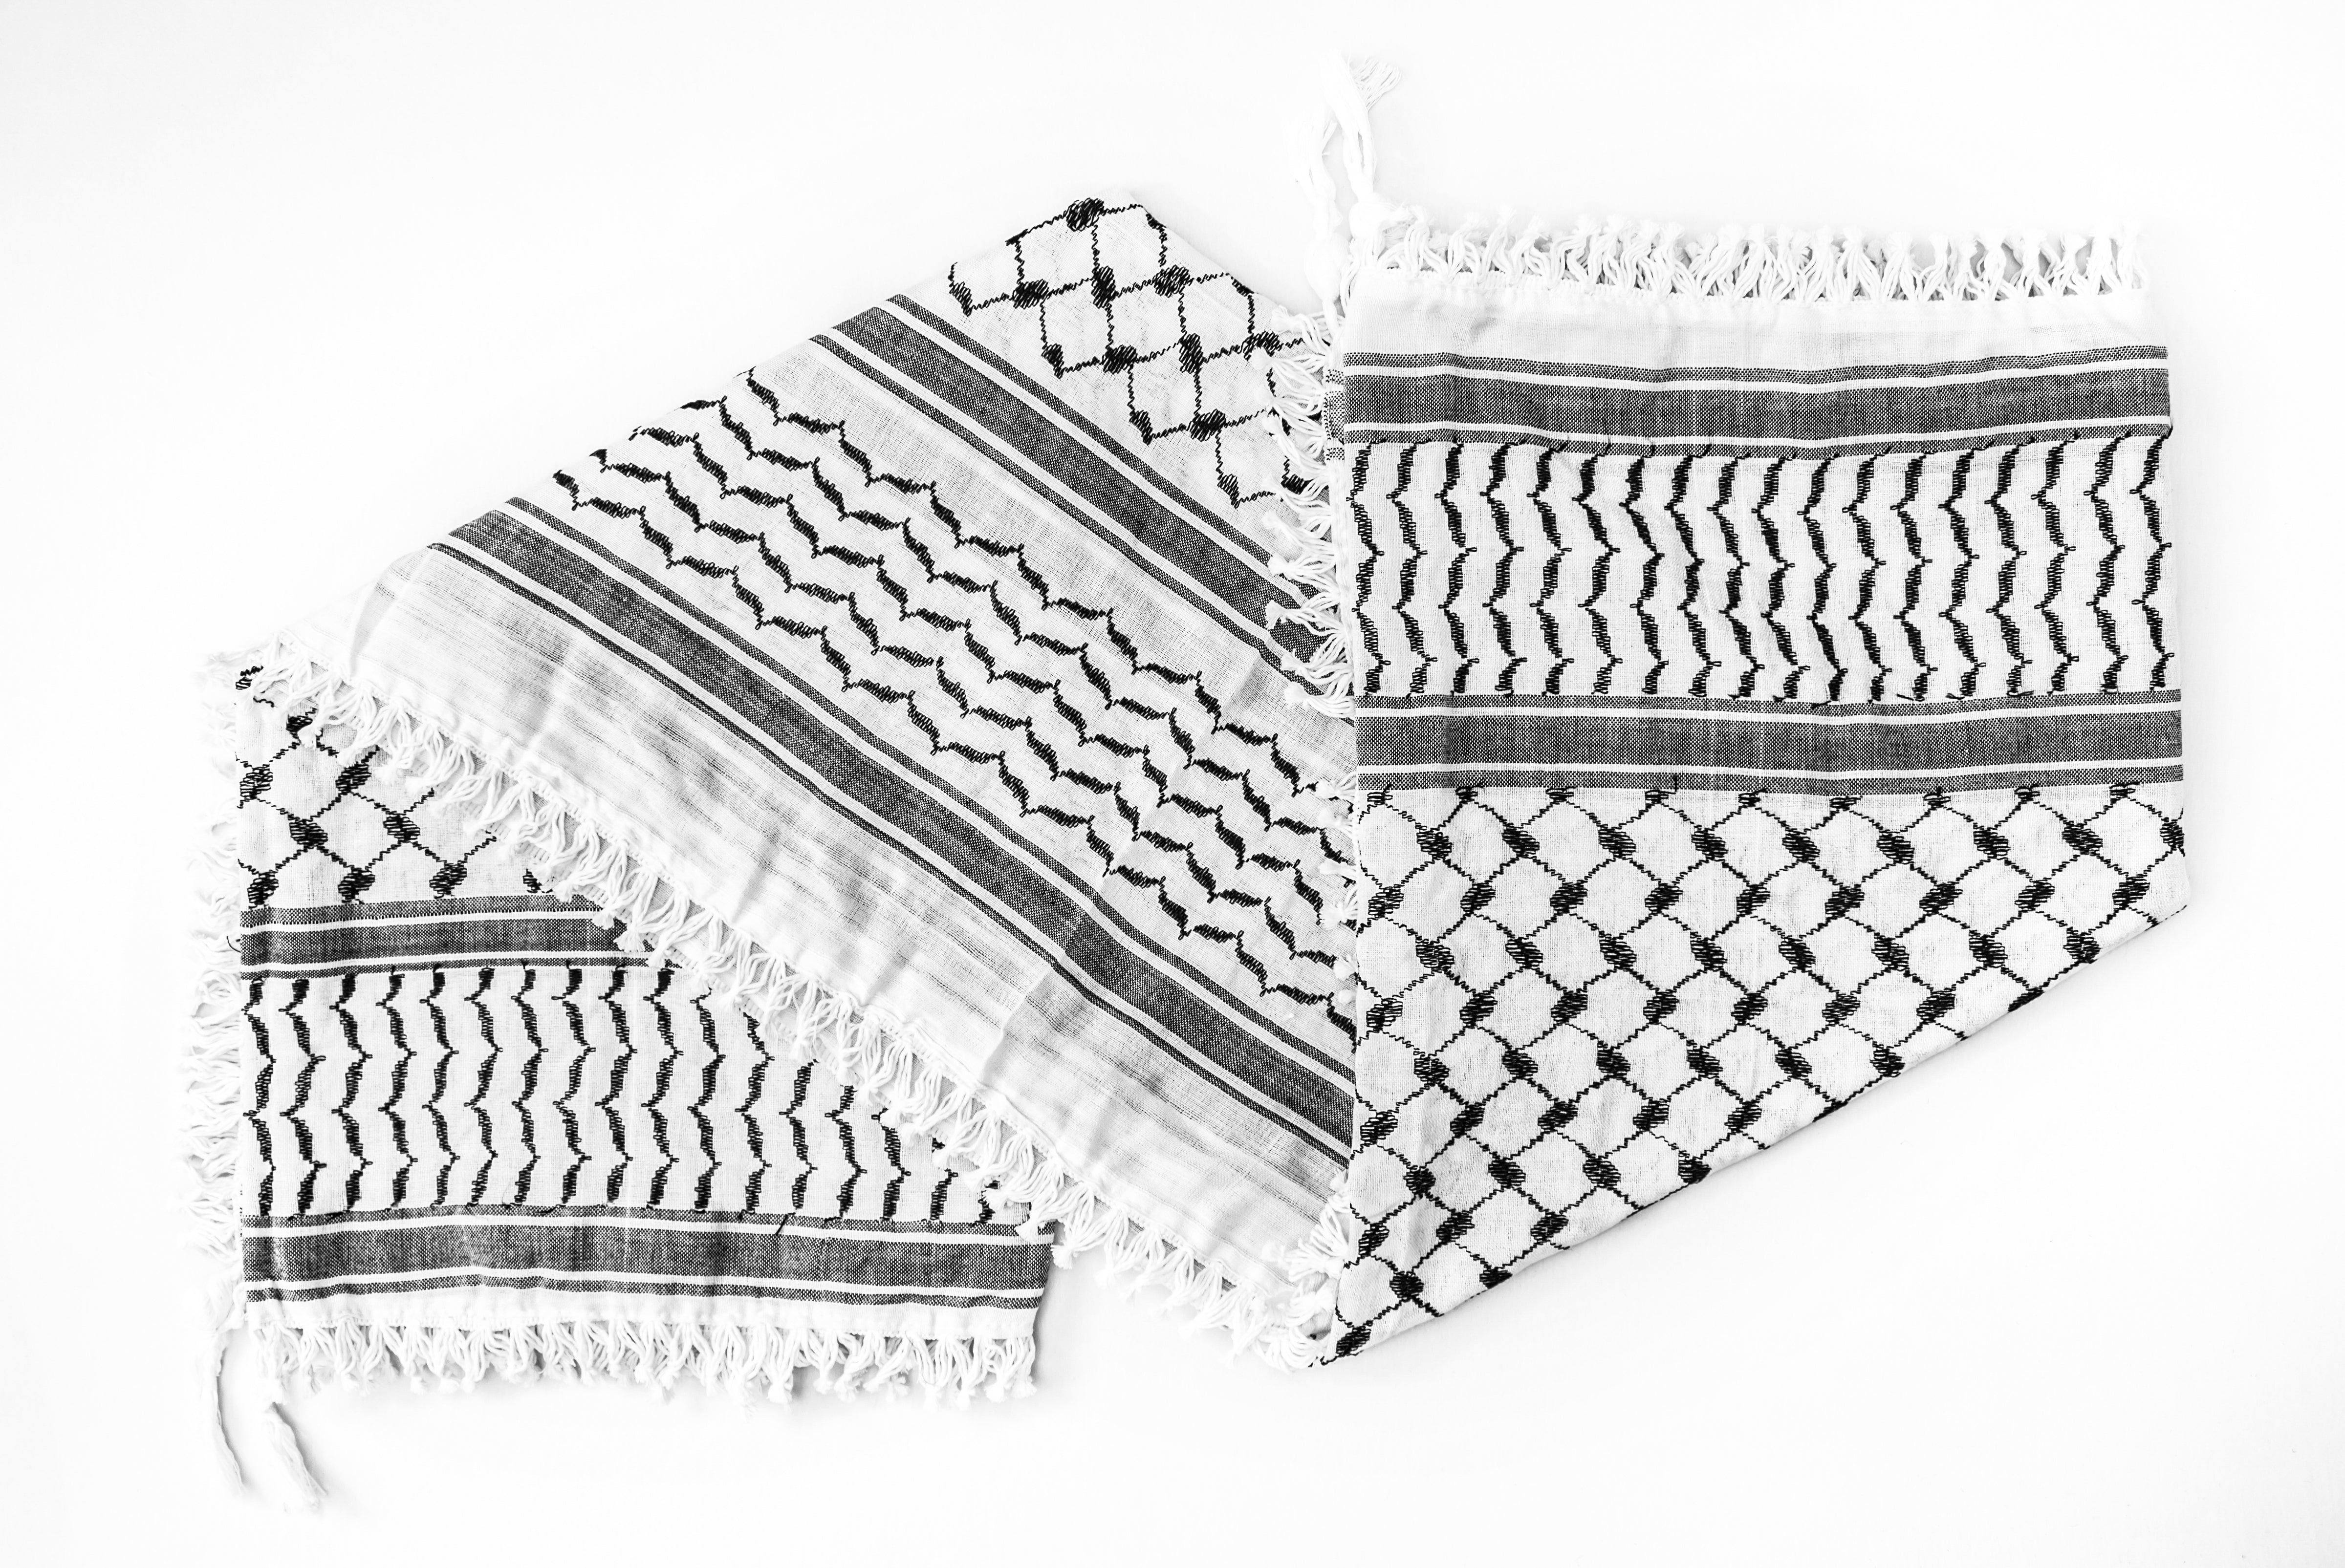 The Palestinian keffiyeh: All you need to know about its origins